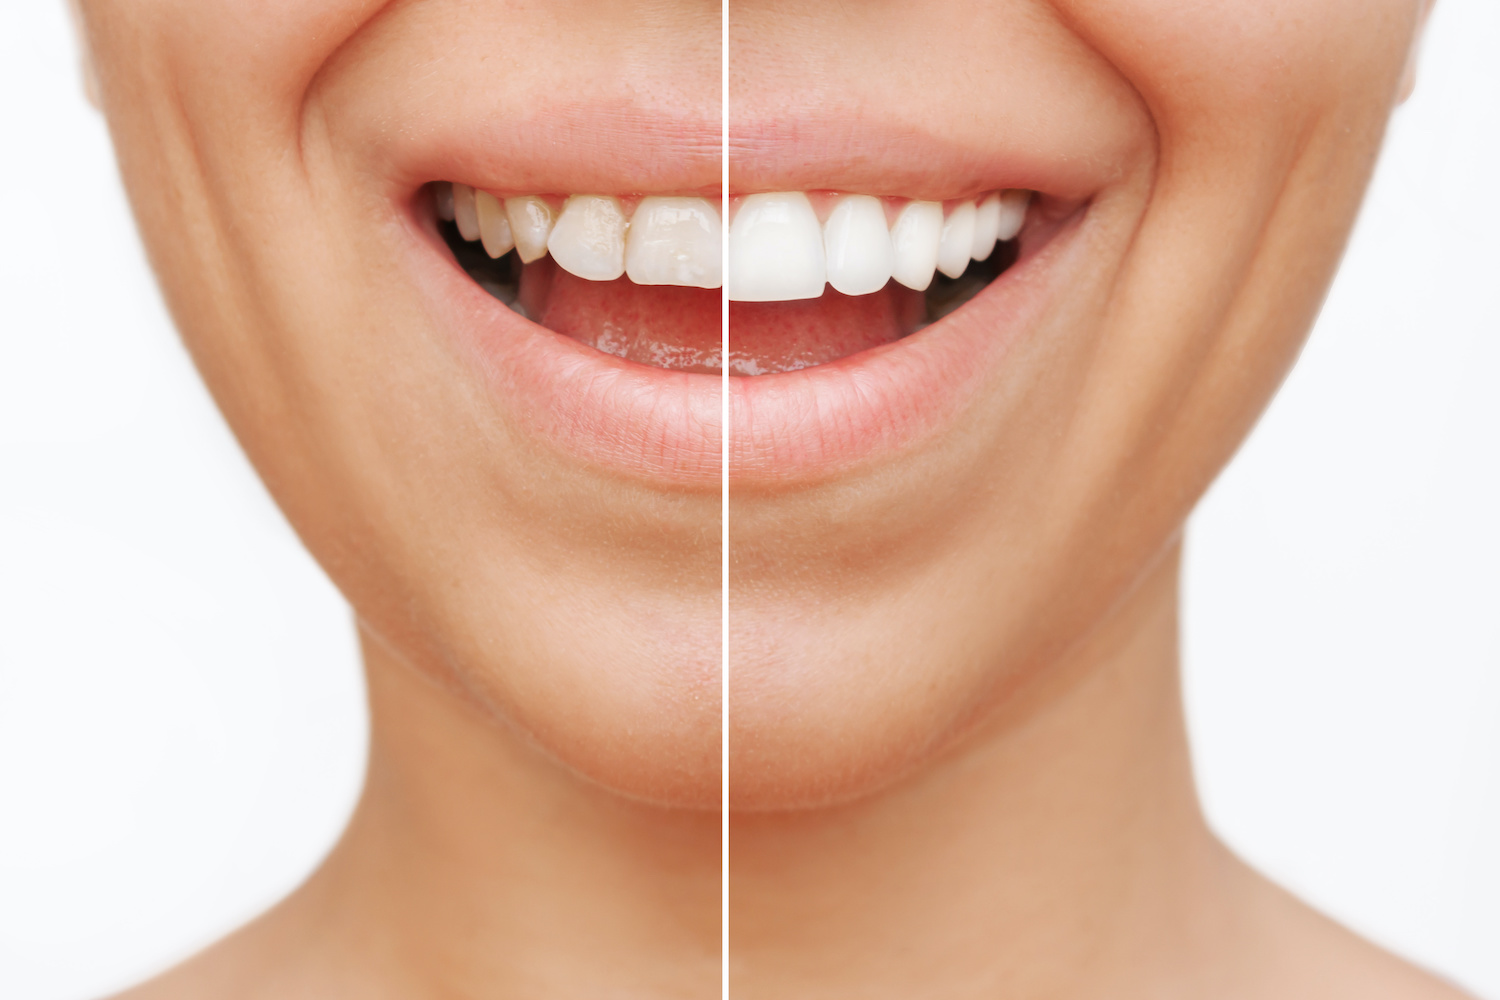 What Does a Cosmetic Dentist in Miami Do?